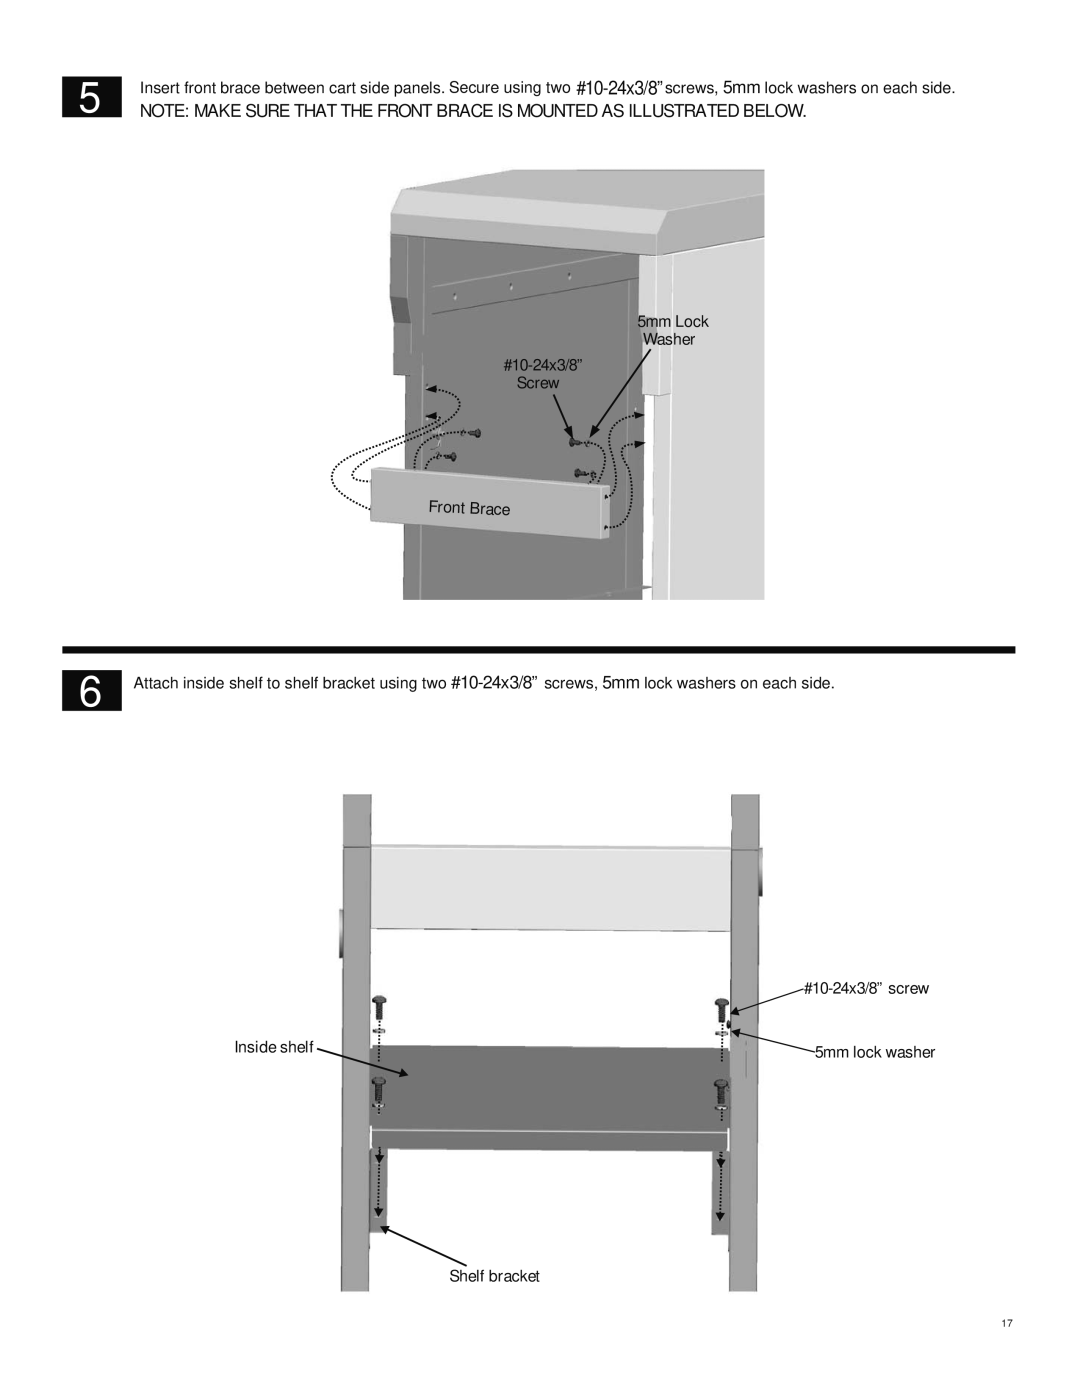 Char-Broil 463269411 Note Make Sure That The Front Brace Is Mounted As Illustrated Below, #10-24x3/8” screw, Inside shelf 